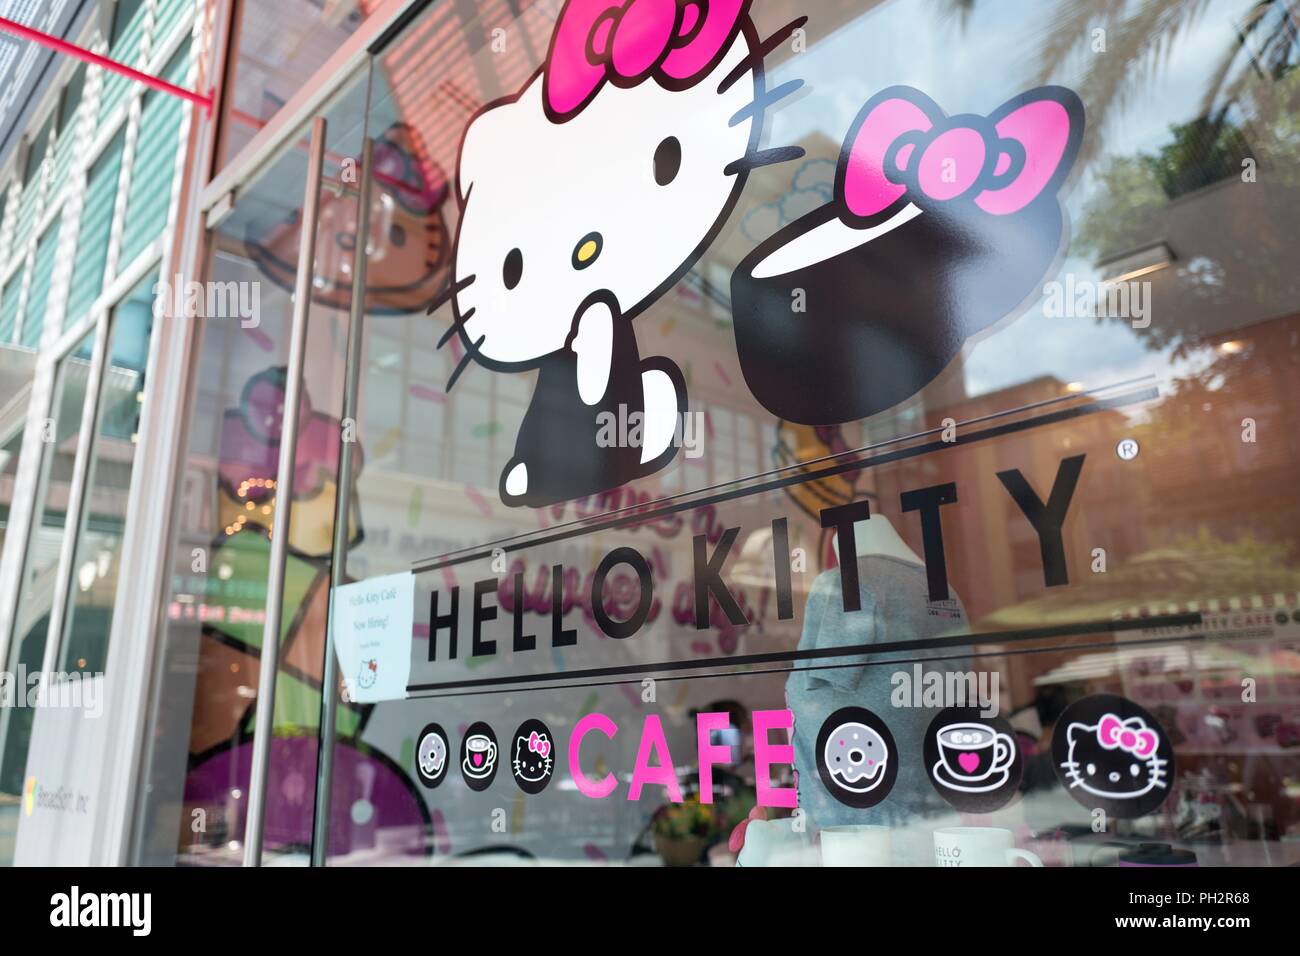 Hello Kitty Cafe set to open location at Las Vegas mall in July